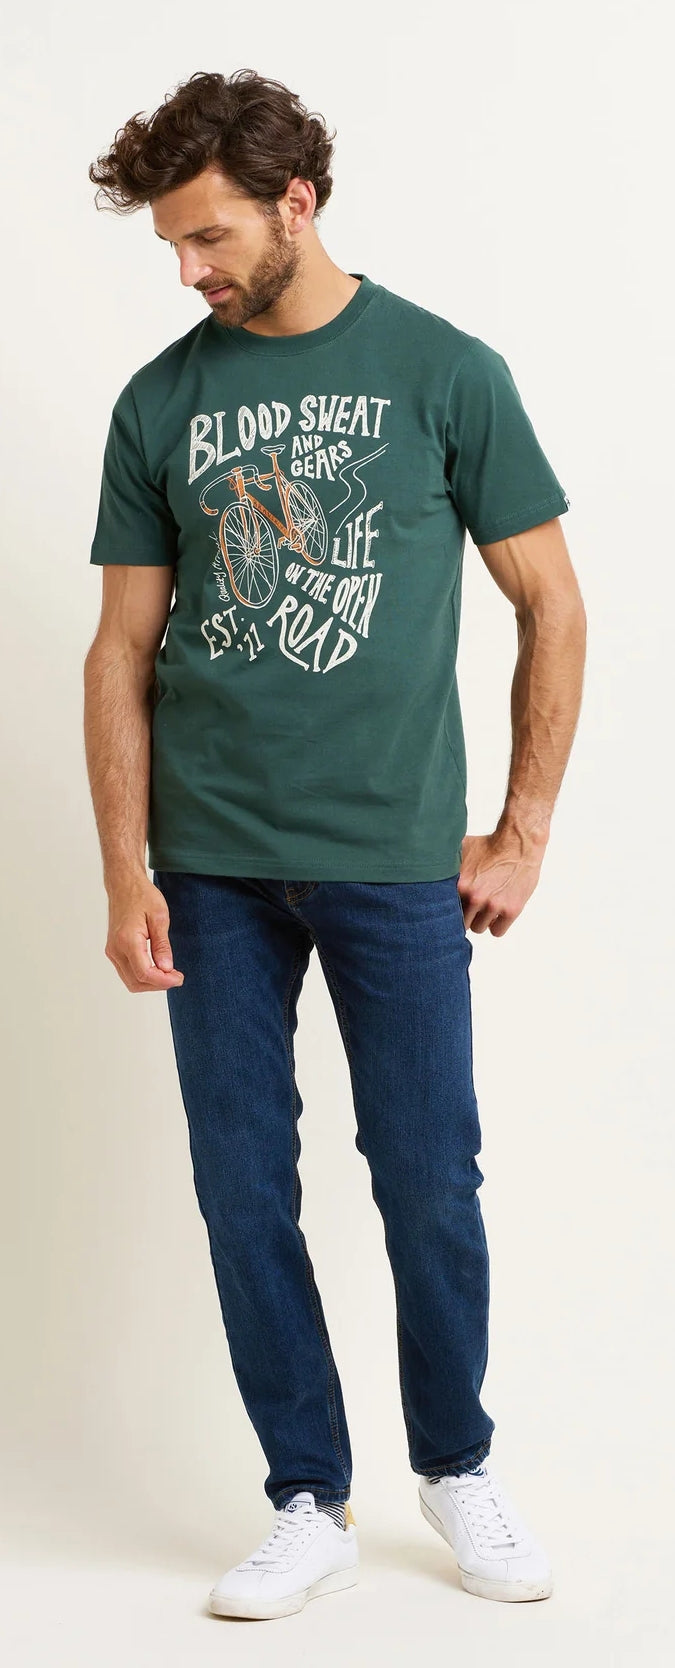 Men's Brakeburn short sleeved t-shirt in khaki green with a bicycle themed print on the front reading 'Blood, Sweat and Gears'.